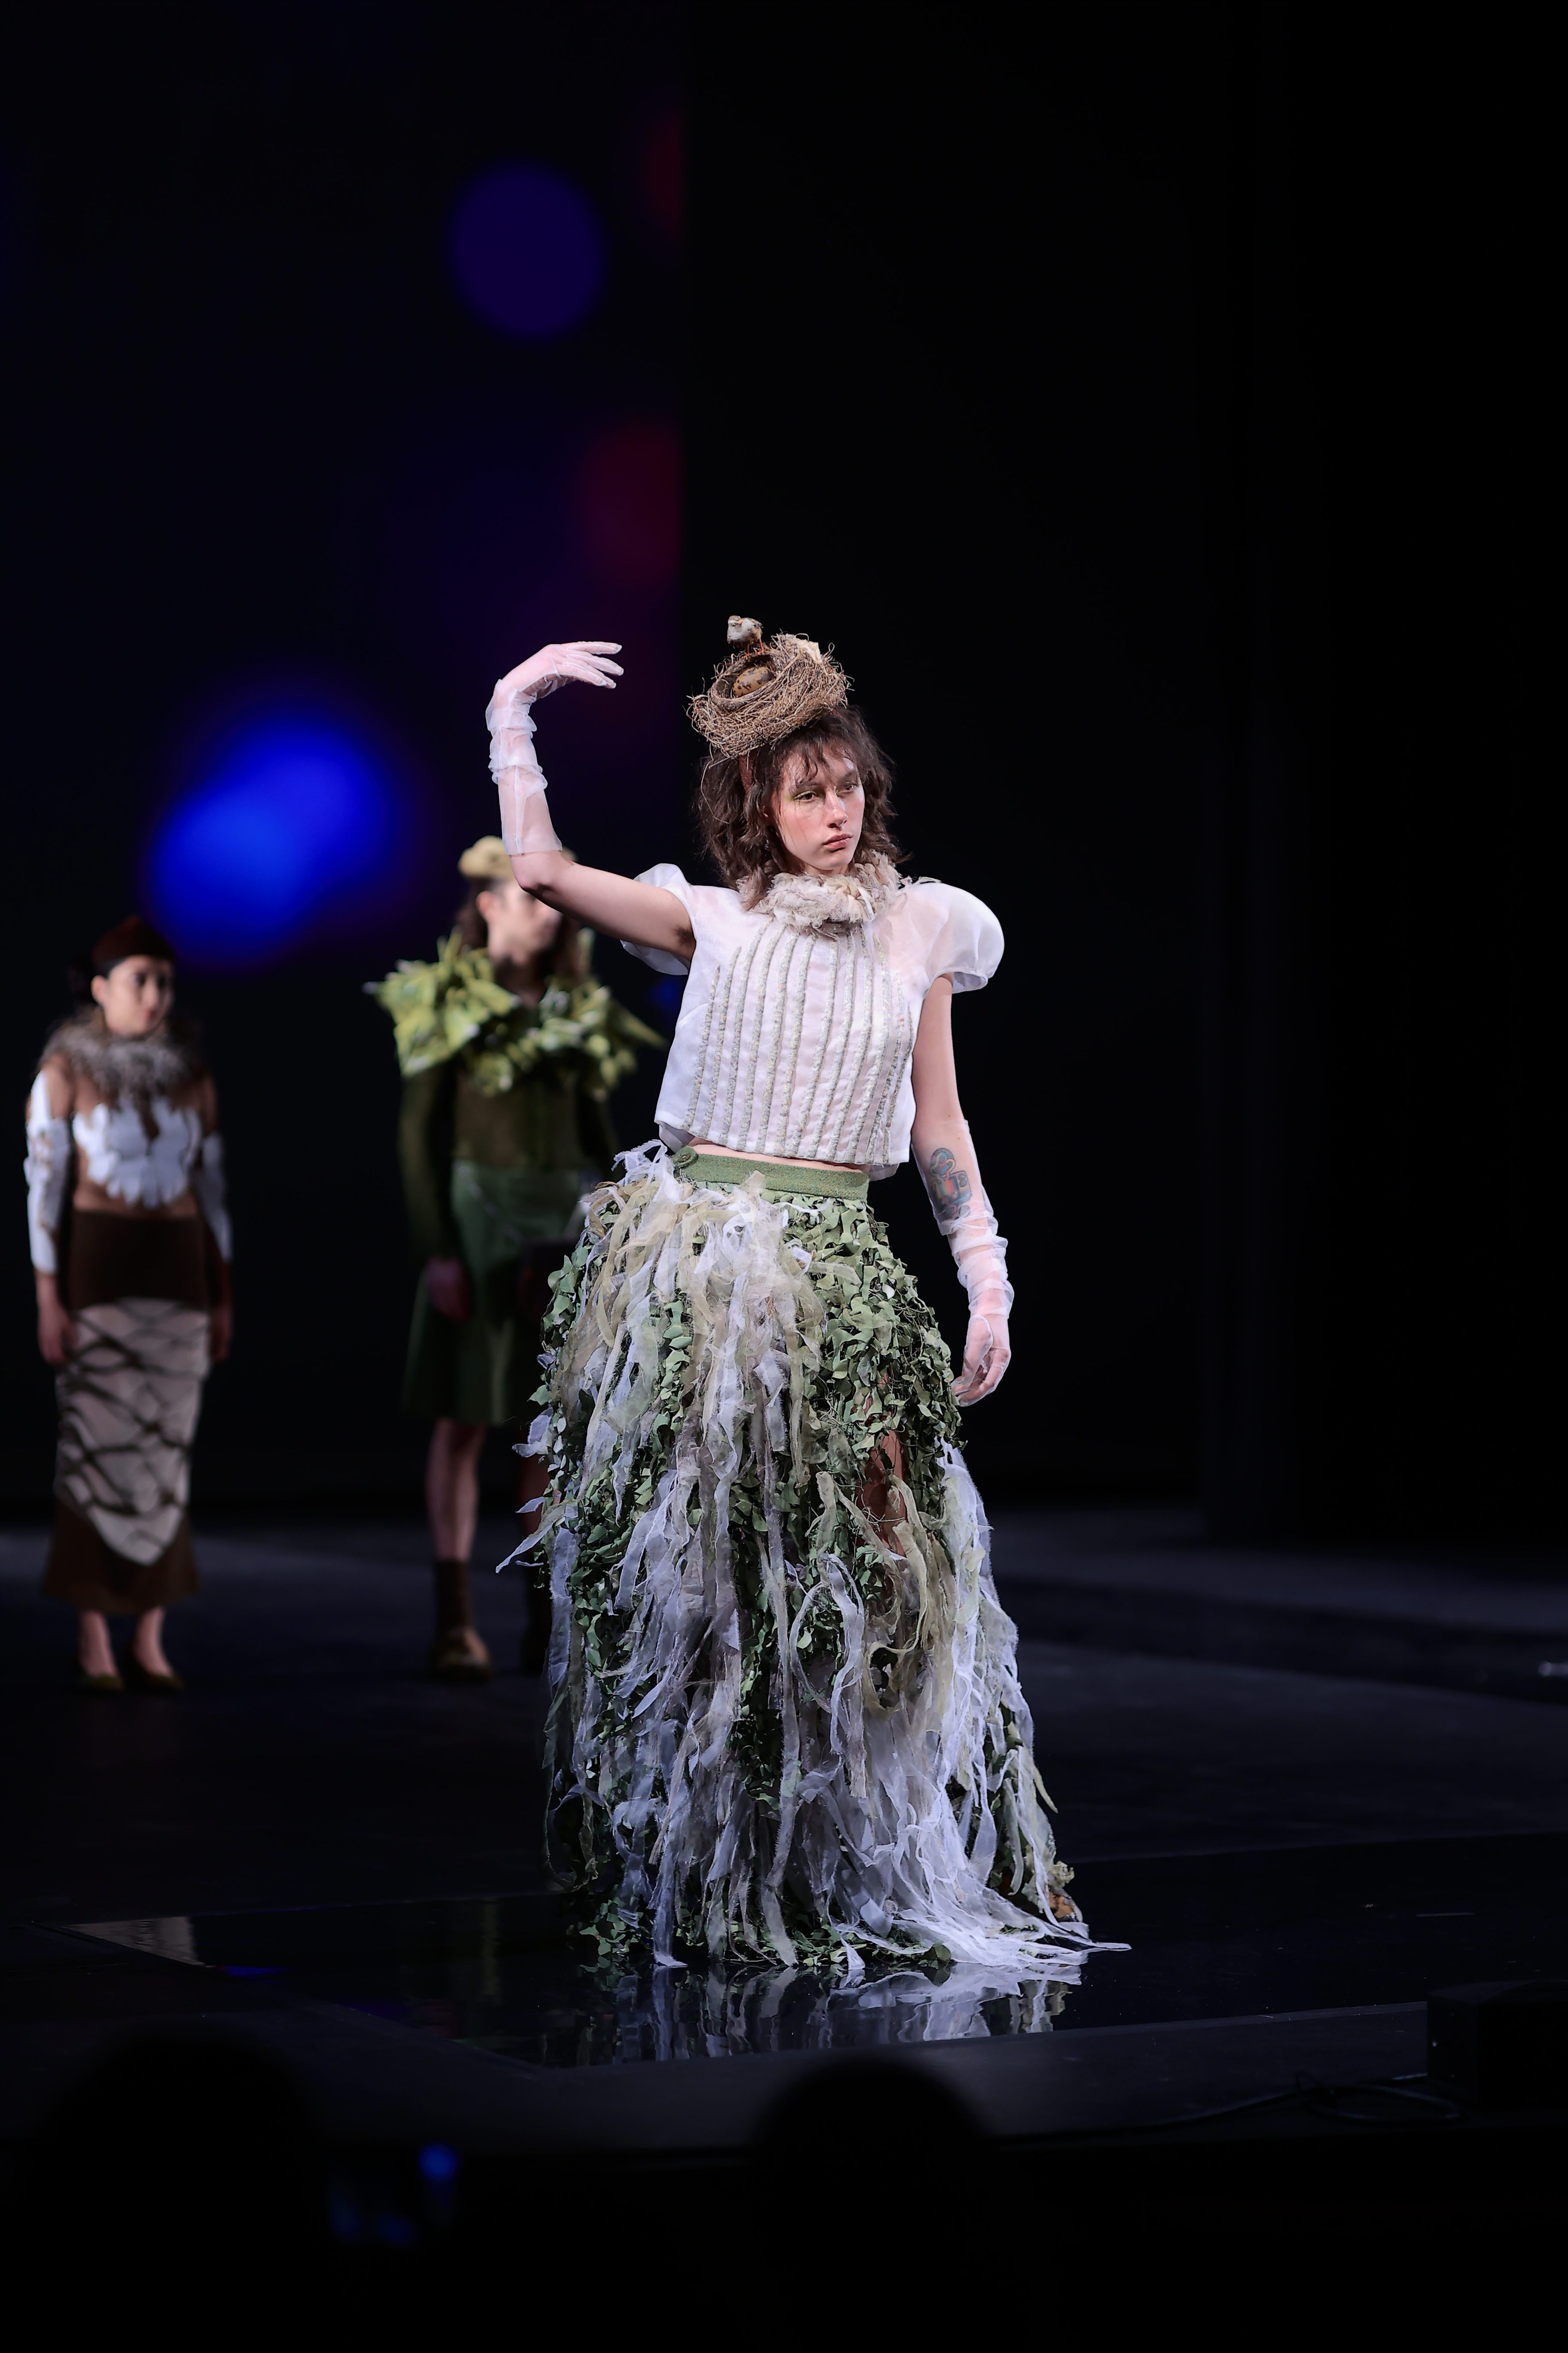 A model strikes a pose with one arm raised, showcasing a stunning ensemble: a white and green textured floor-length skirt, translucent gloves, a white top with puffy shoulders, and a unique bird's nest hat.